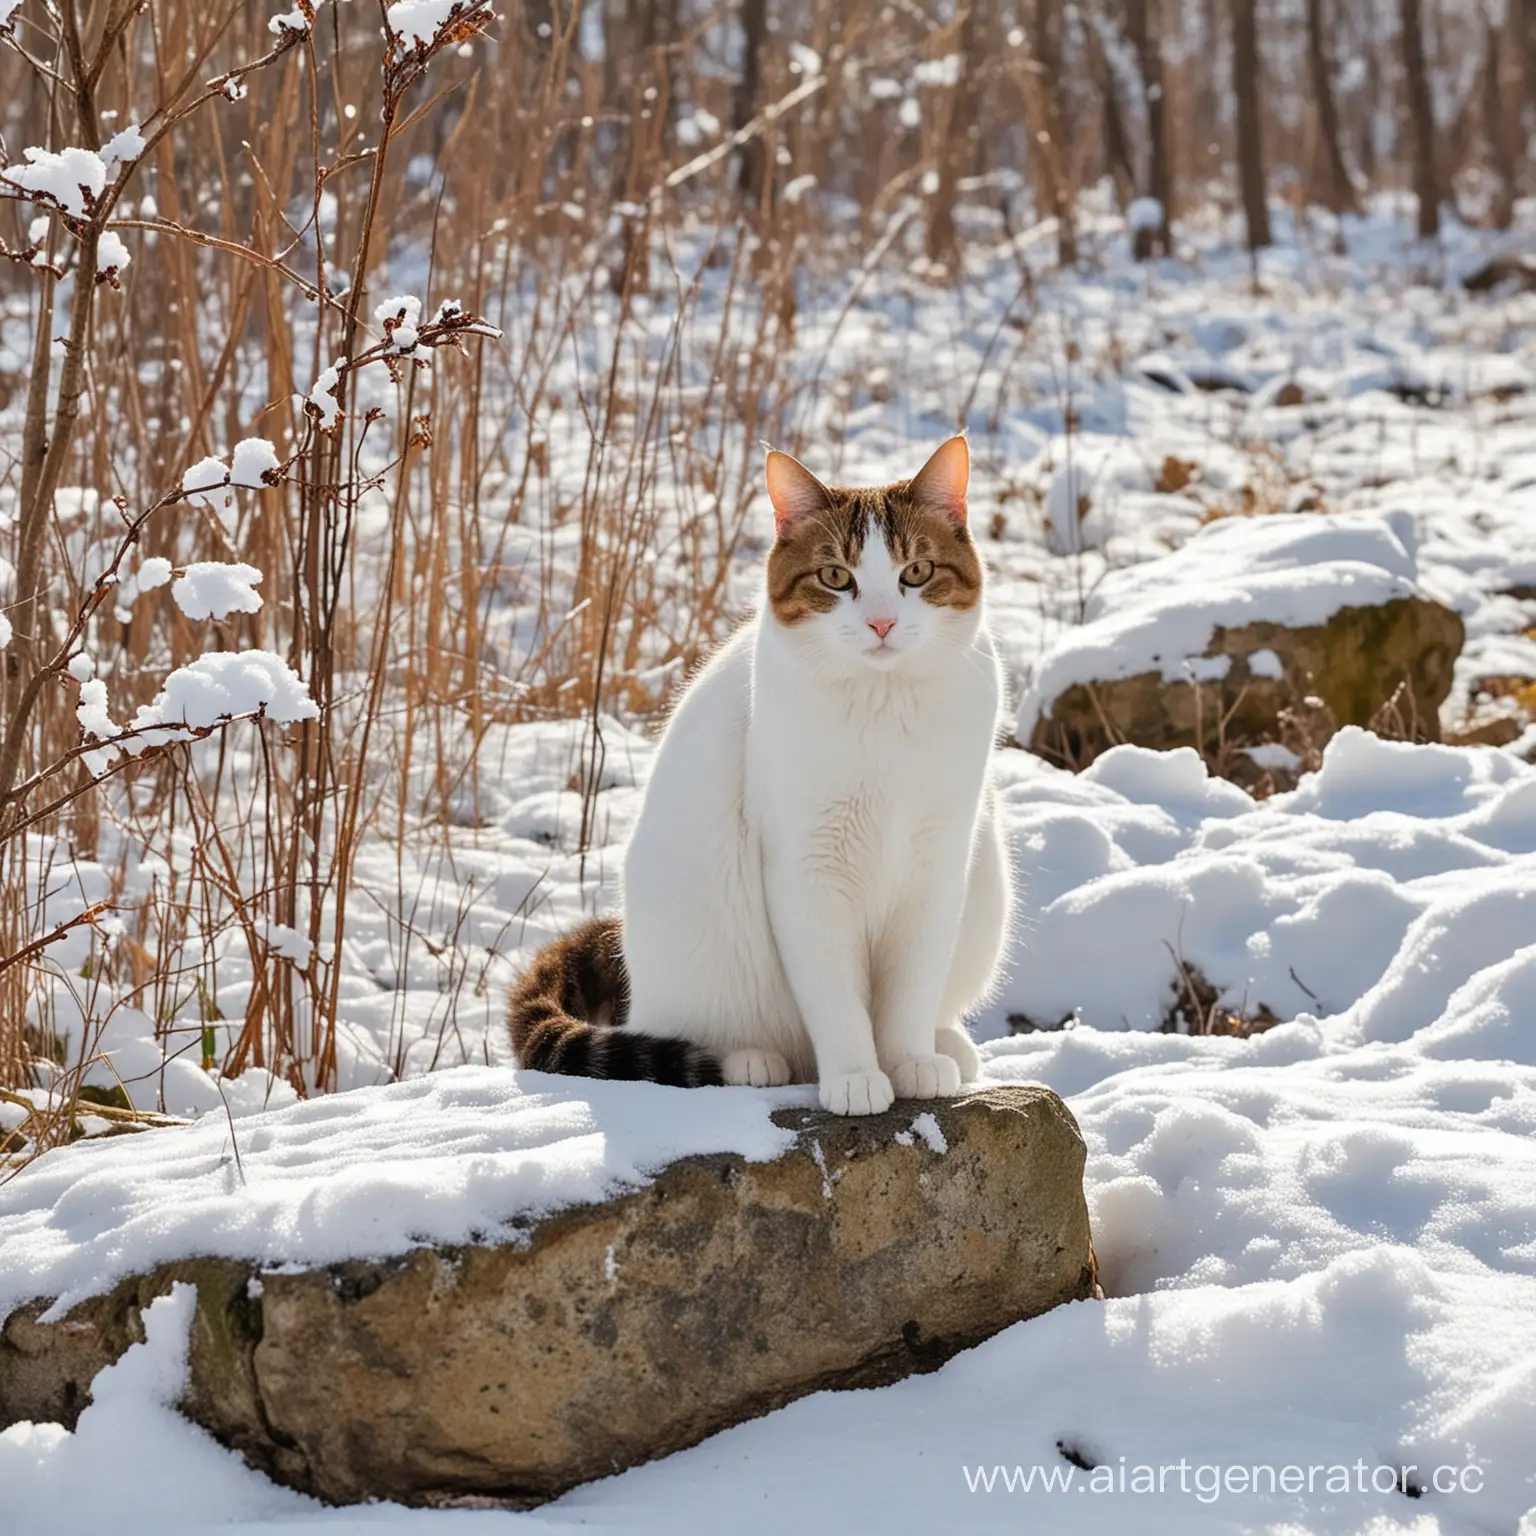 Springtime-Melting-Snow-in-Forest-with-Cat-on-Stone